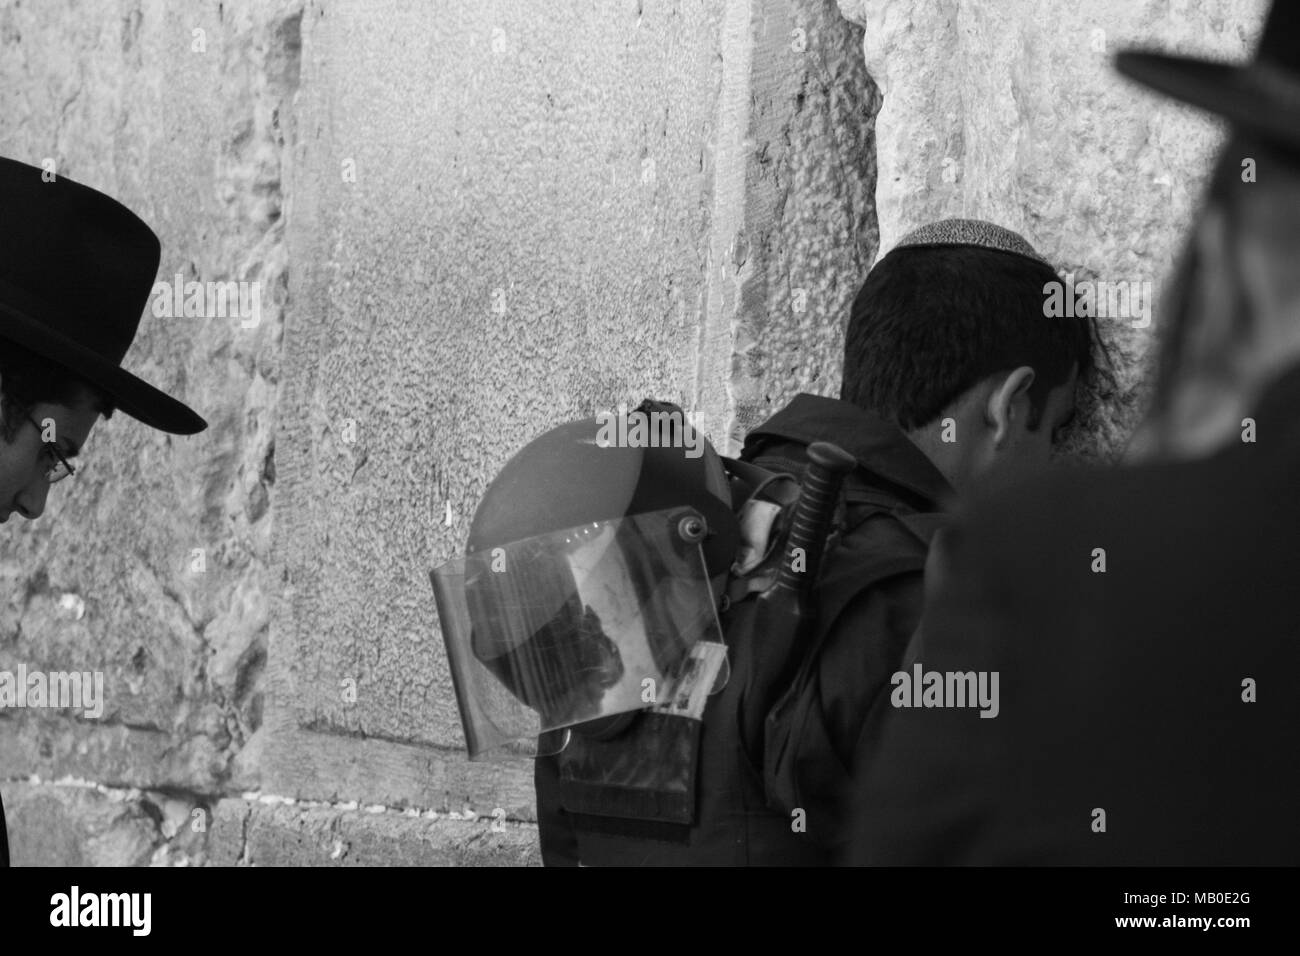 Western Wall, Israel, 05.03.2015: is also called the wailing wall. It is one of the holiest sites for jews and located at Jerusalem Temple Mount. Stock Photo